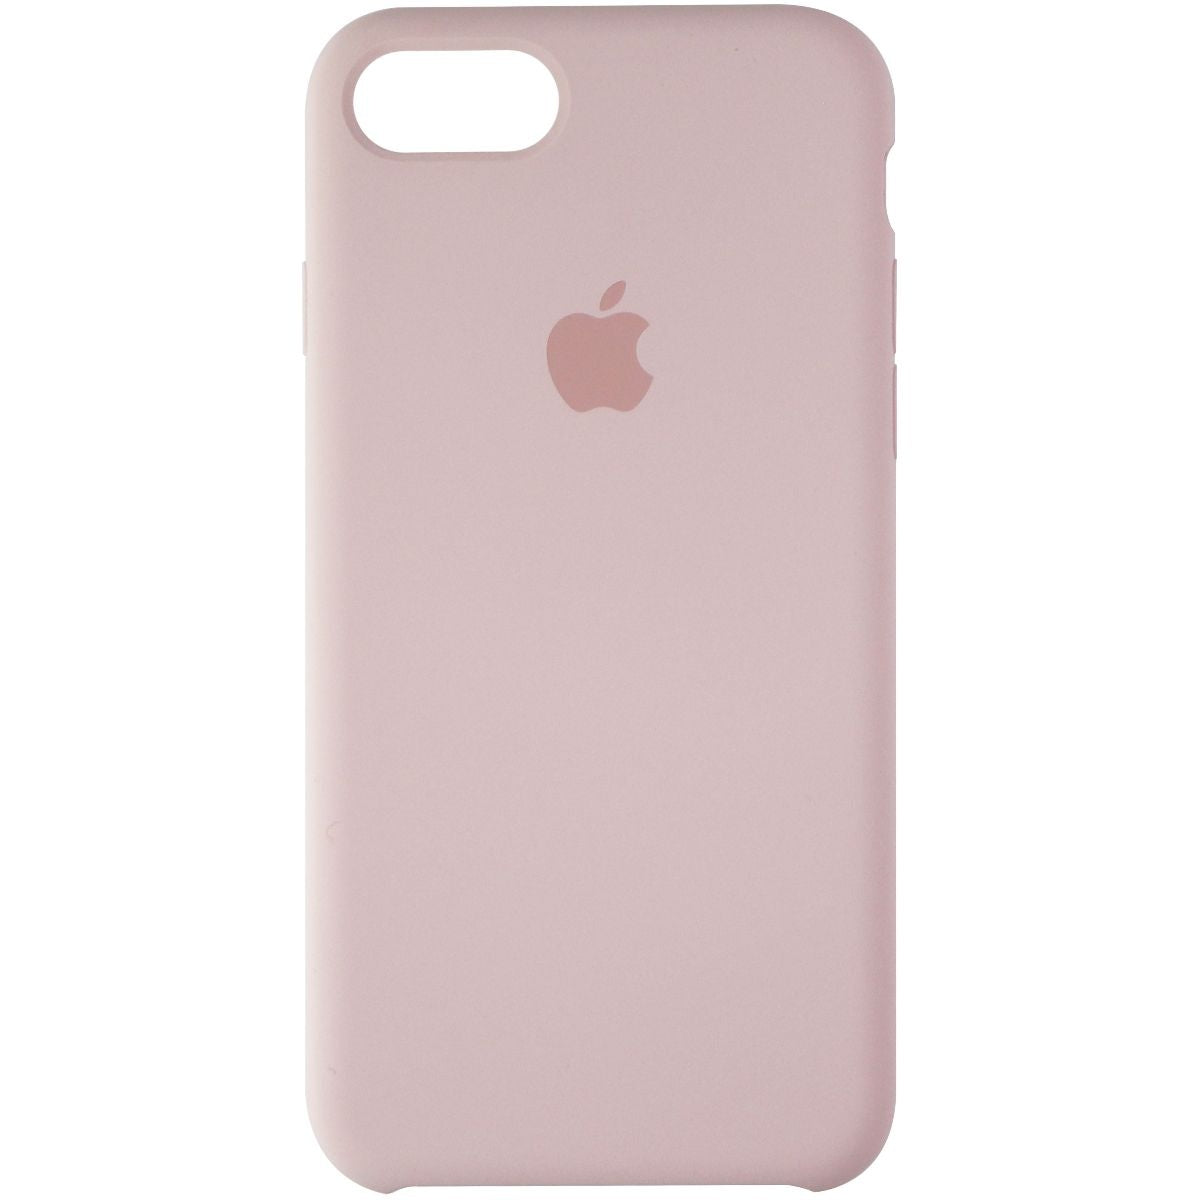 Apple Silicone Case for Apple iPhone 7 Smartphone - Pink Sand (MMX12ZM/A) Cell Phone - Cases, Covers & Skins Apple    - Simple Cell Bulk Wholesale Pricing - USA Seller